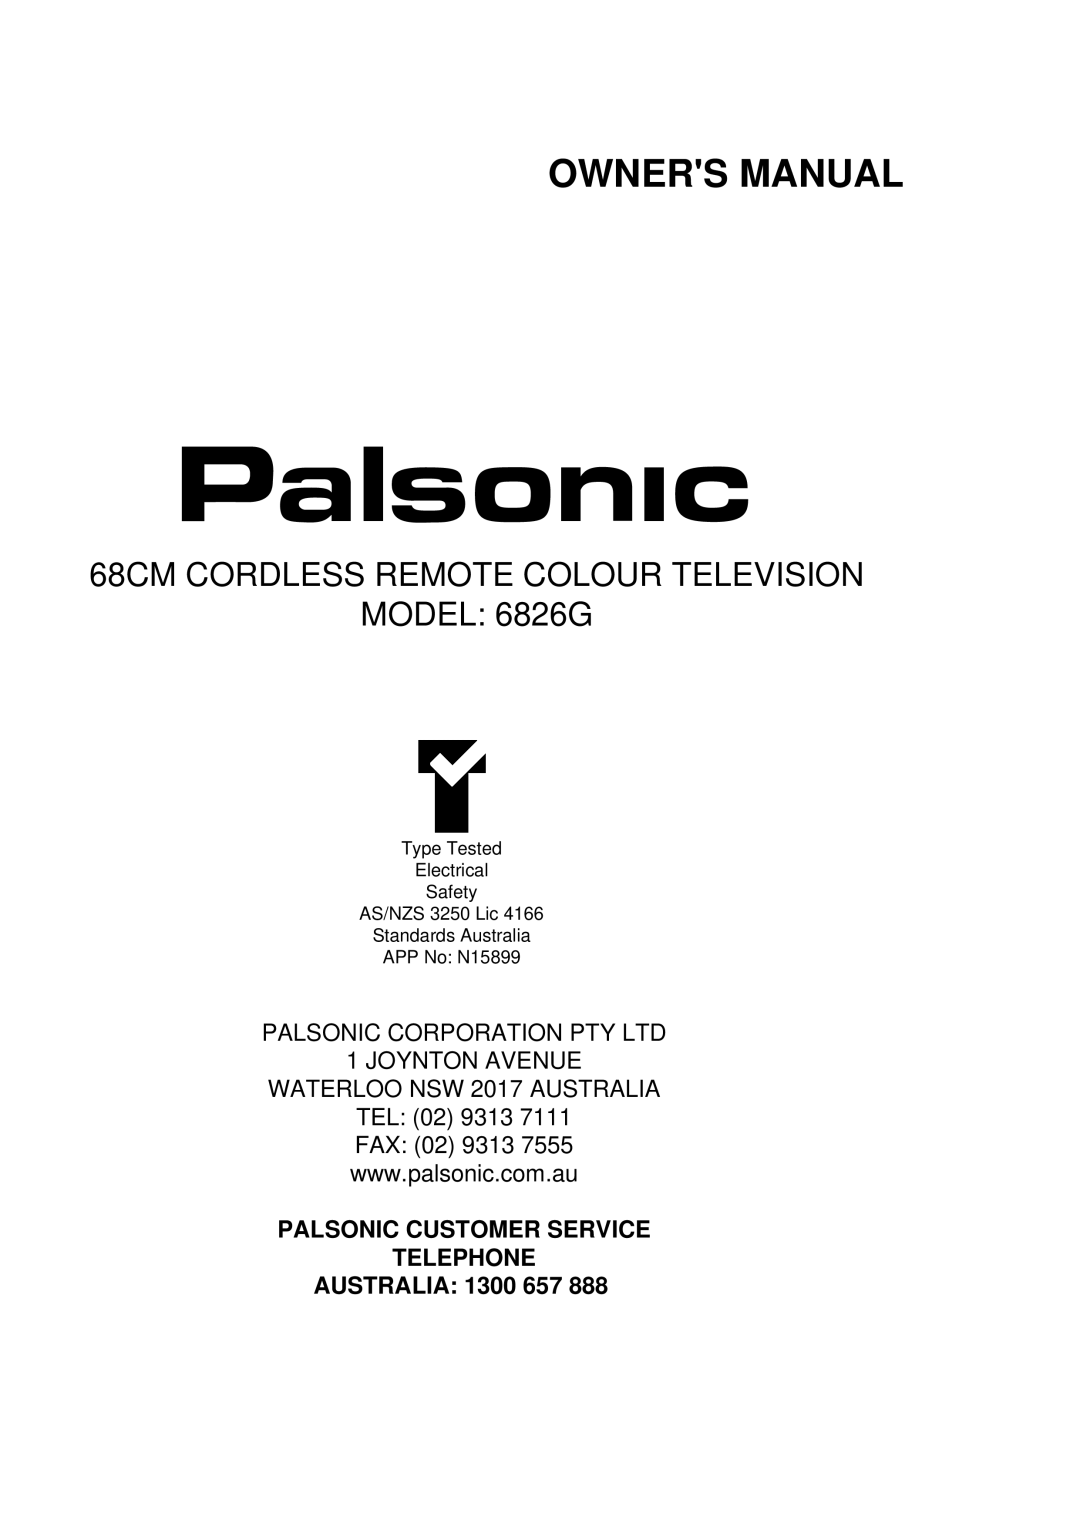 Palsonic 6826G owner manual 68CM Cordless Remote Colour Television, Palsonic Customer Service Telephone 